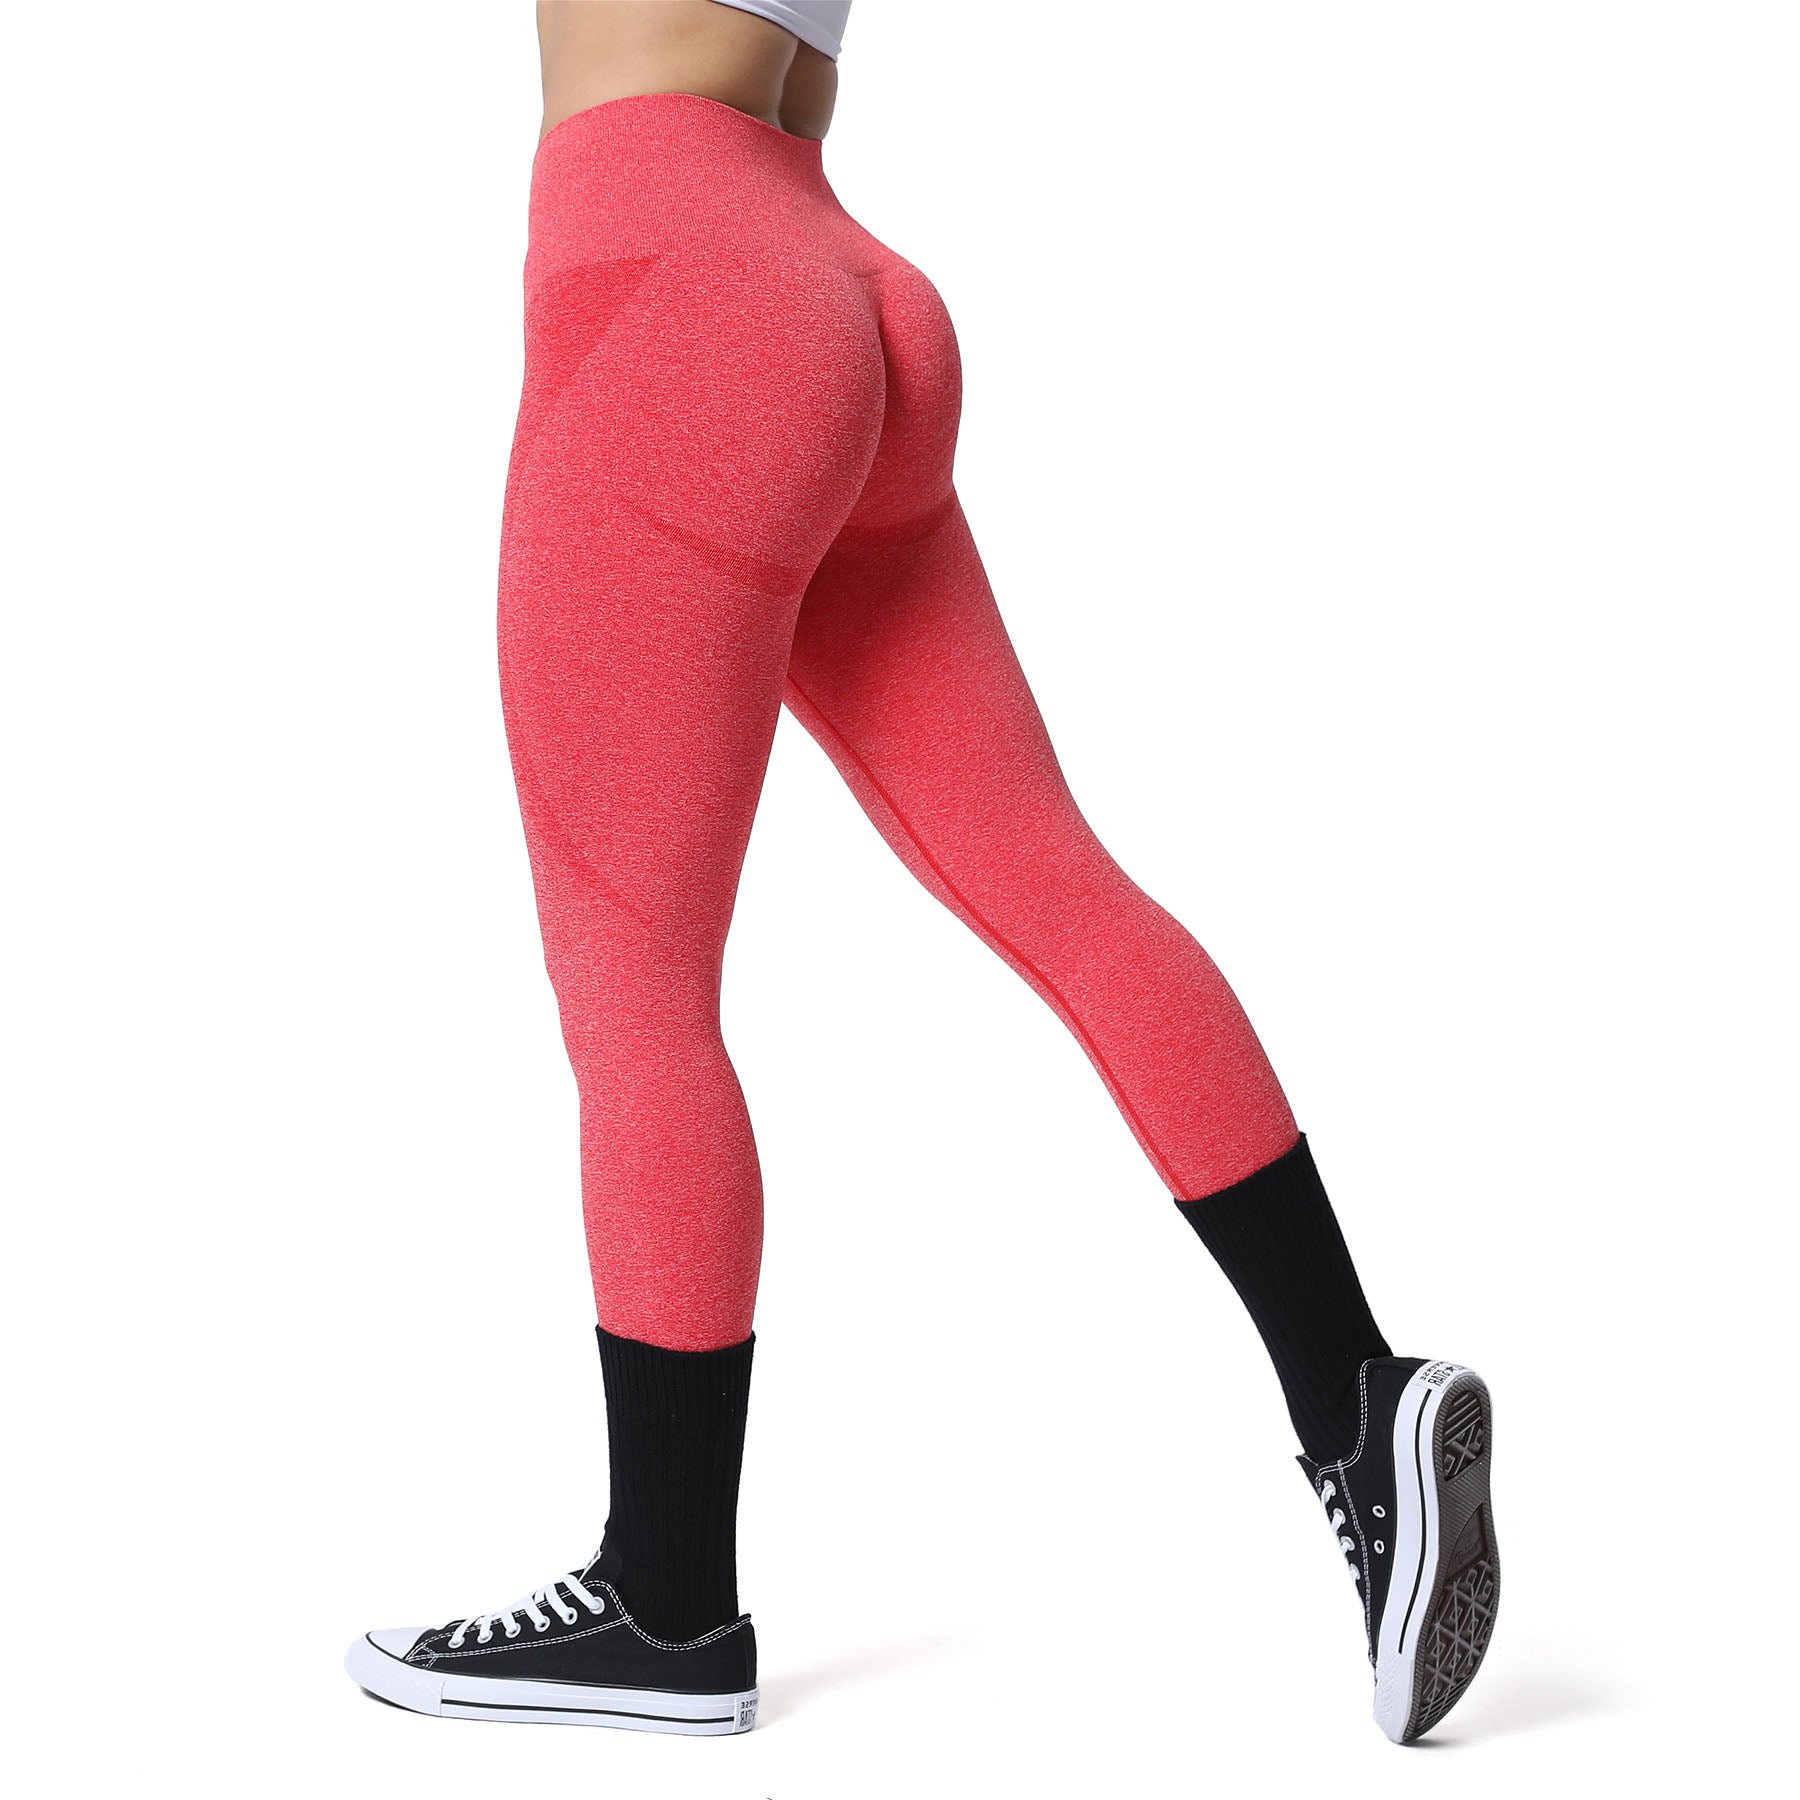 Aoxjox Purple Seamless Contour Leggings Size XS - $23 - From Bella